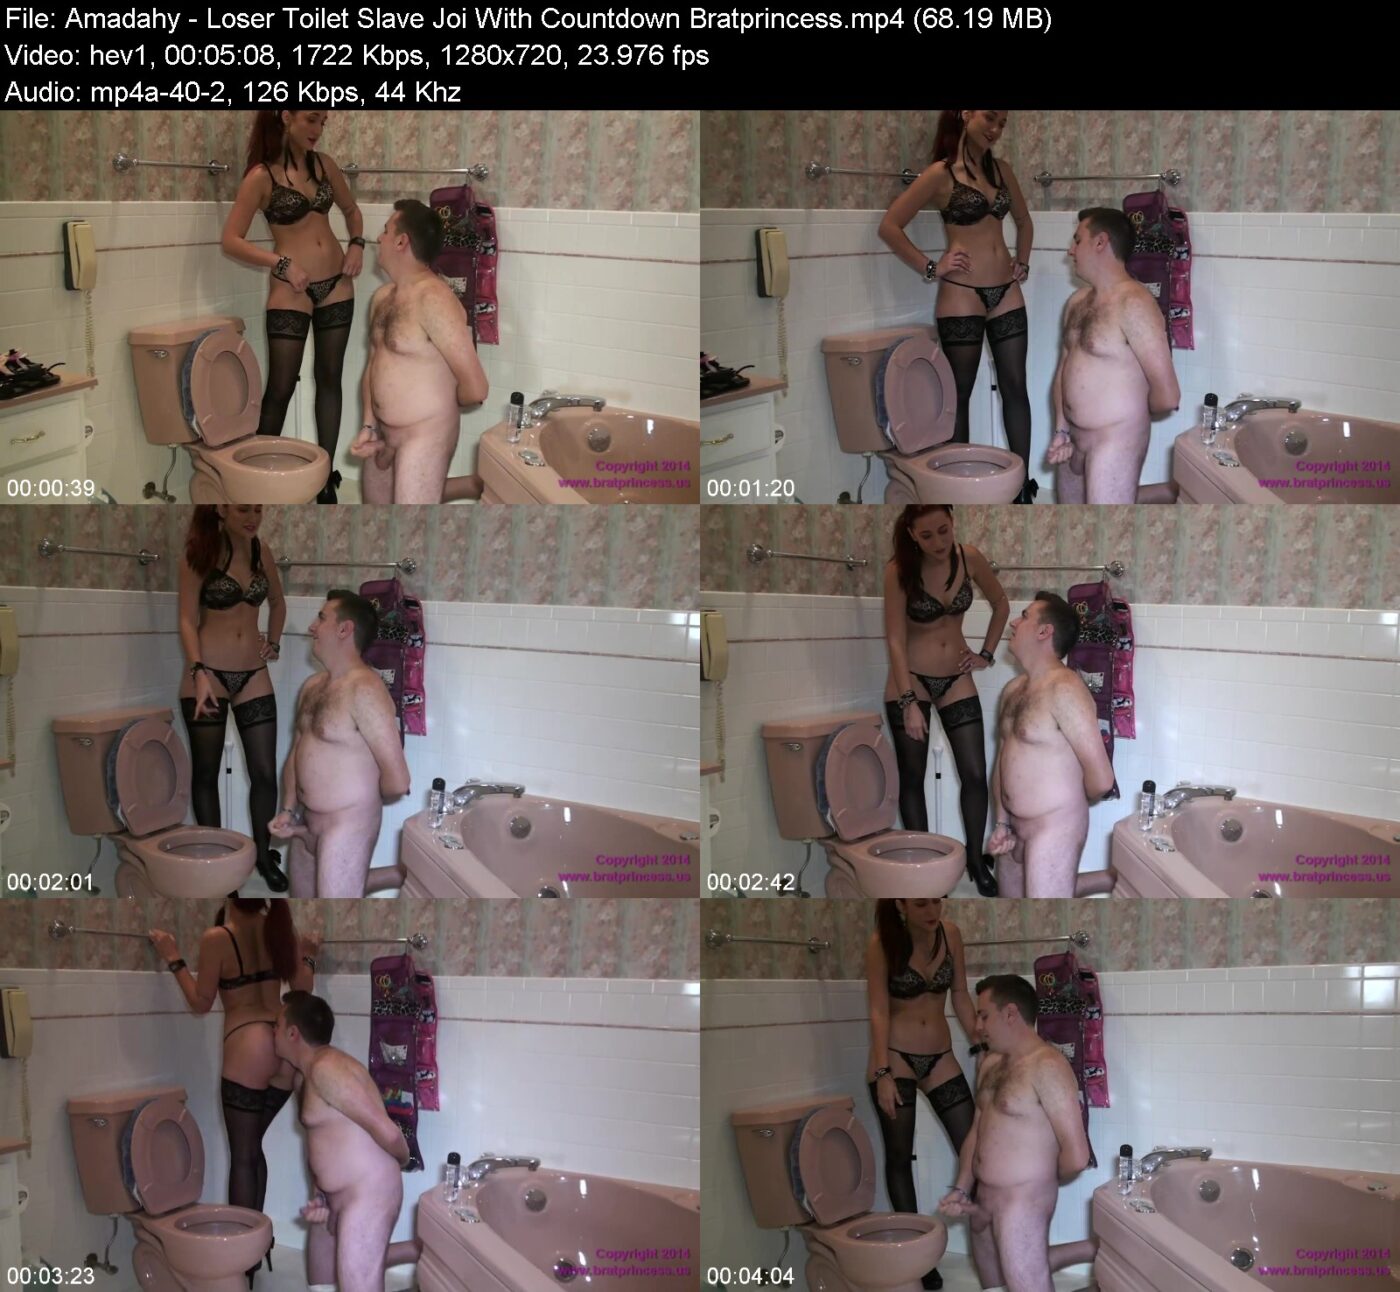 Amadahy in Loser Toilet Slave Joi With Countdown Bratprincess